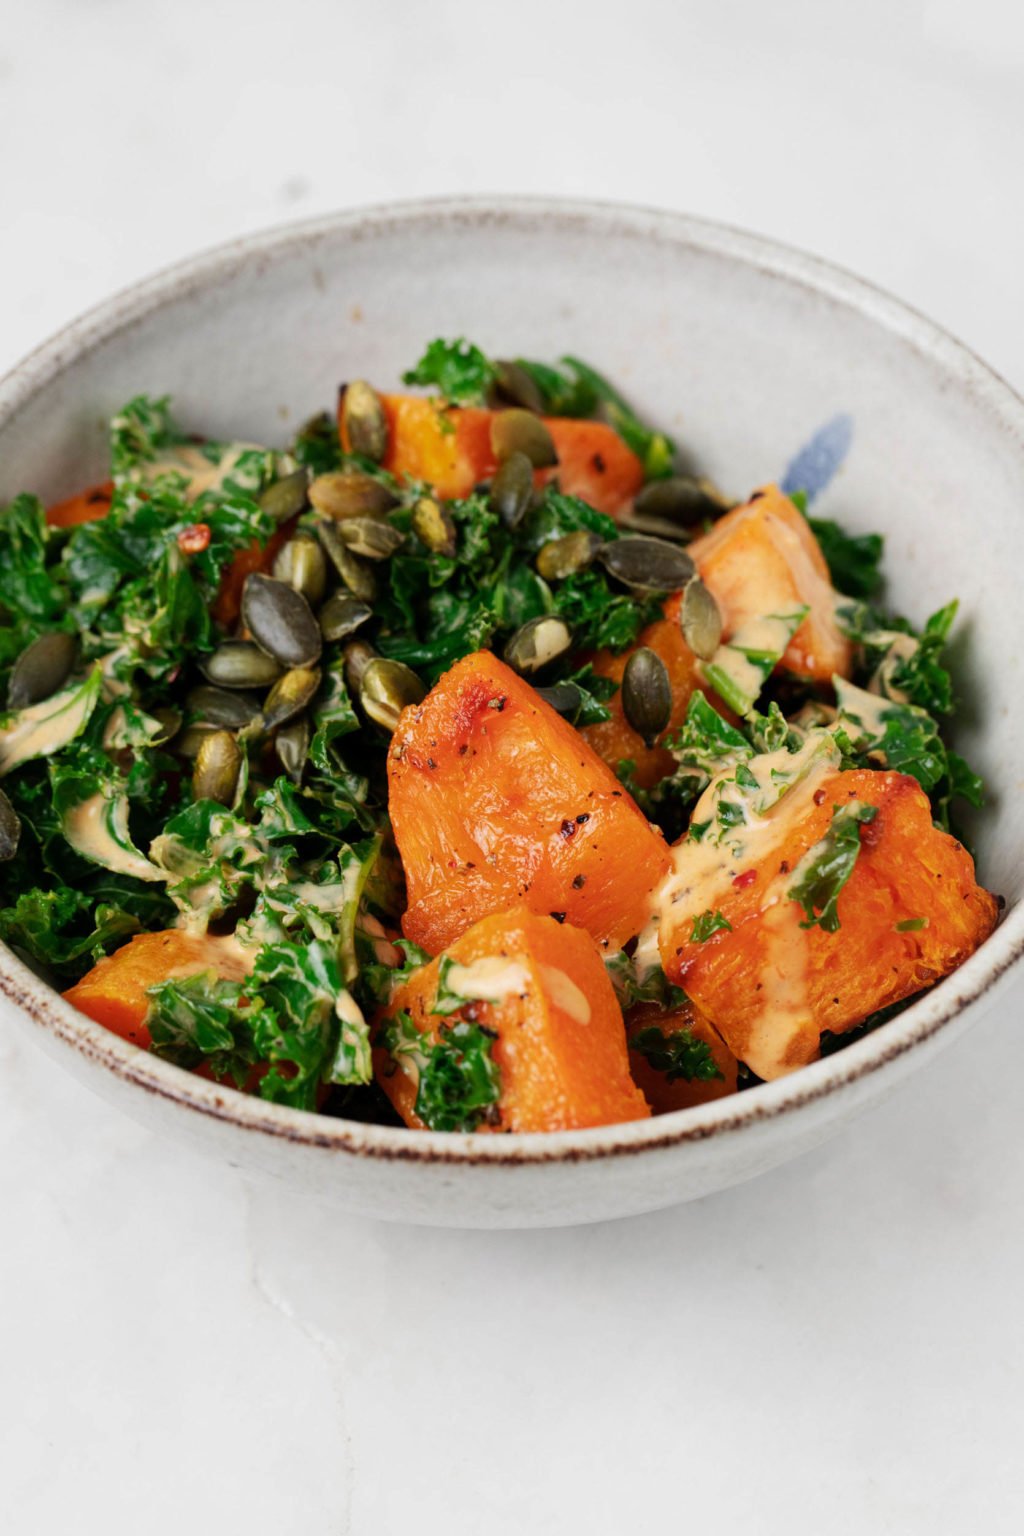 A serving of warm winter vegetables and steamed kale has been topped with toasted pepitas and a creamy dressing.